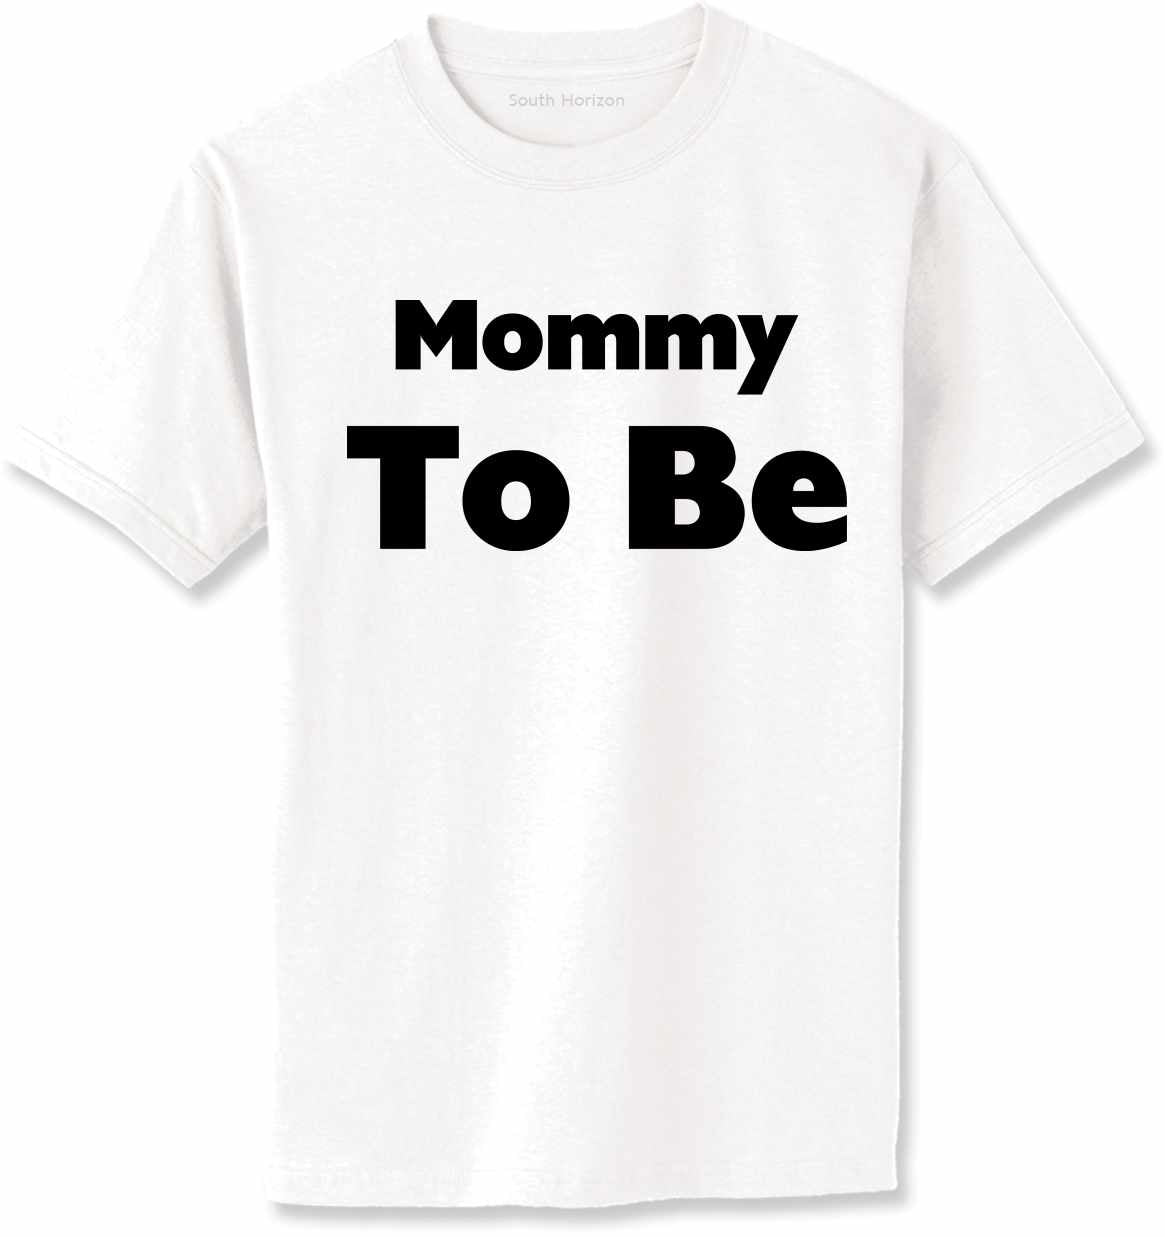 Mommy To Be Adult T-Shirt (#913-1)